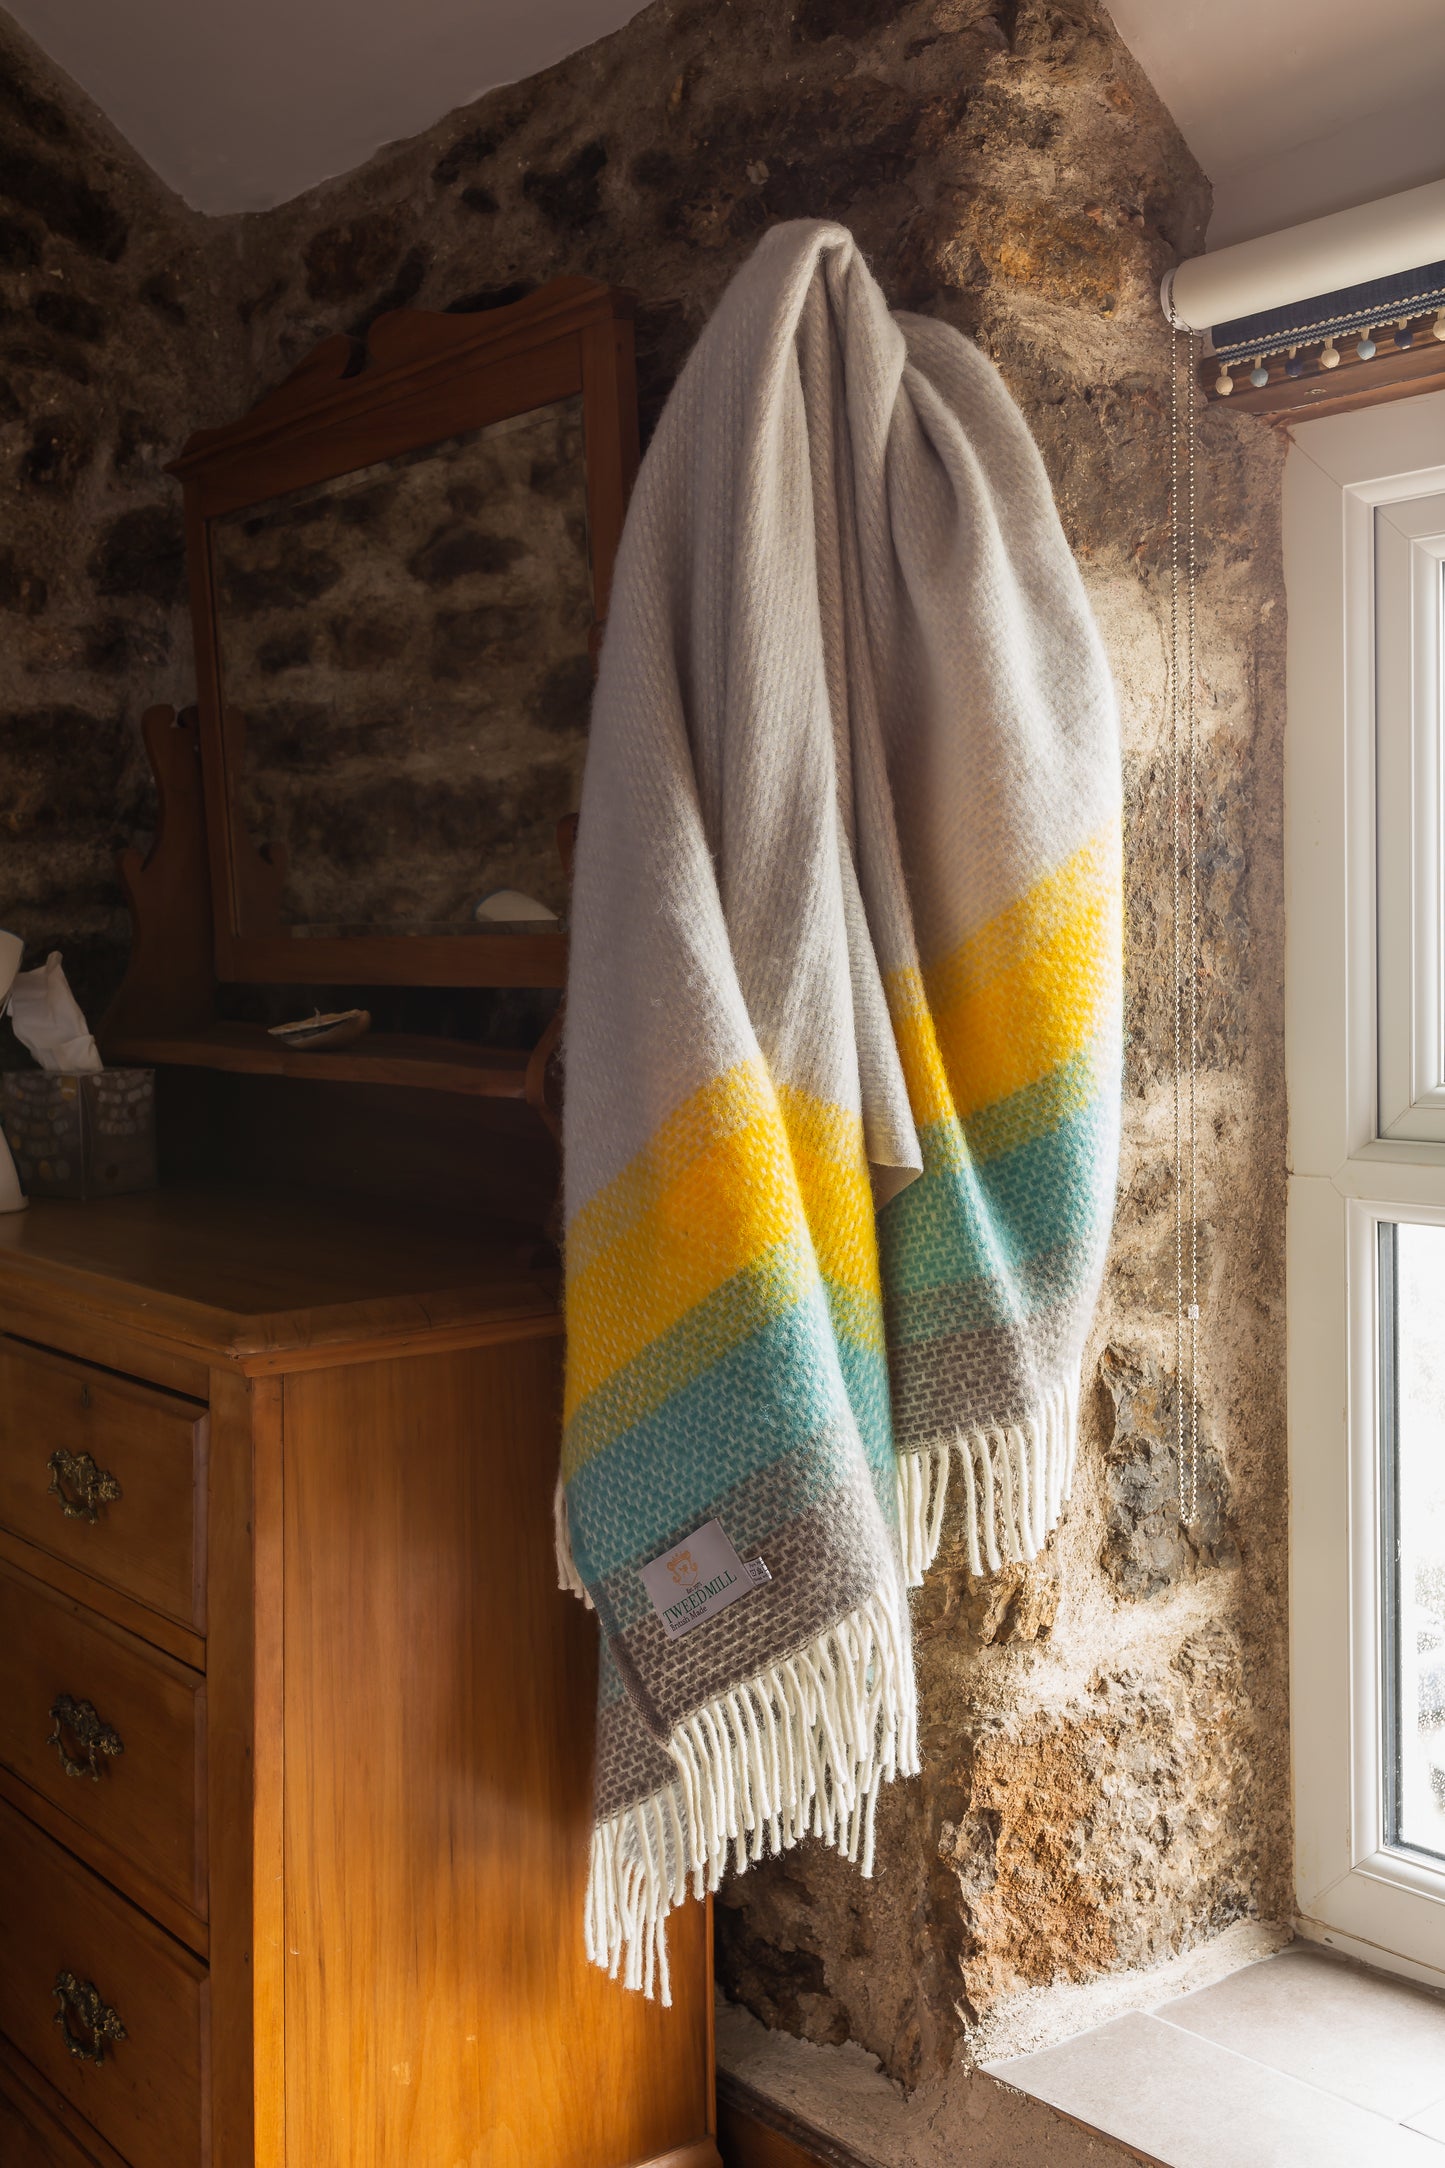 Tweedmill Ombre Pure New Wool Throw, Tidal